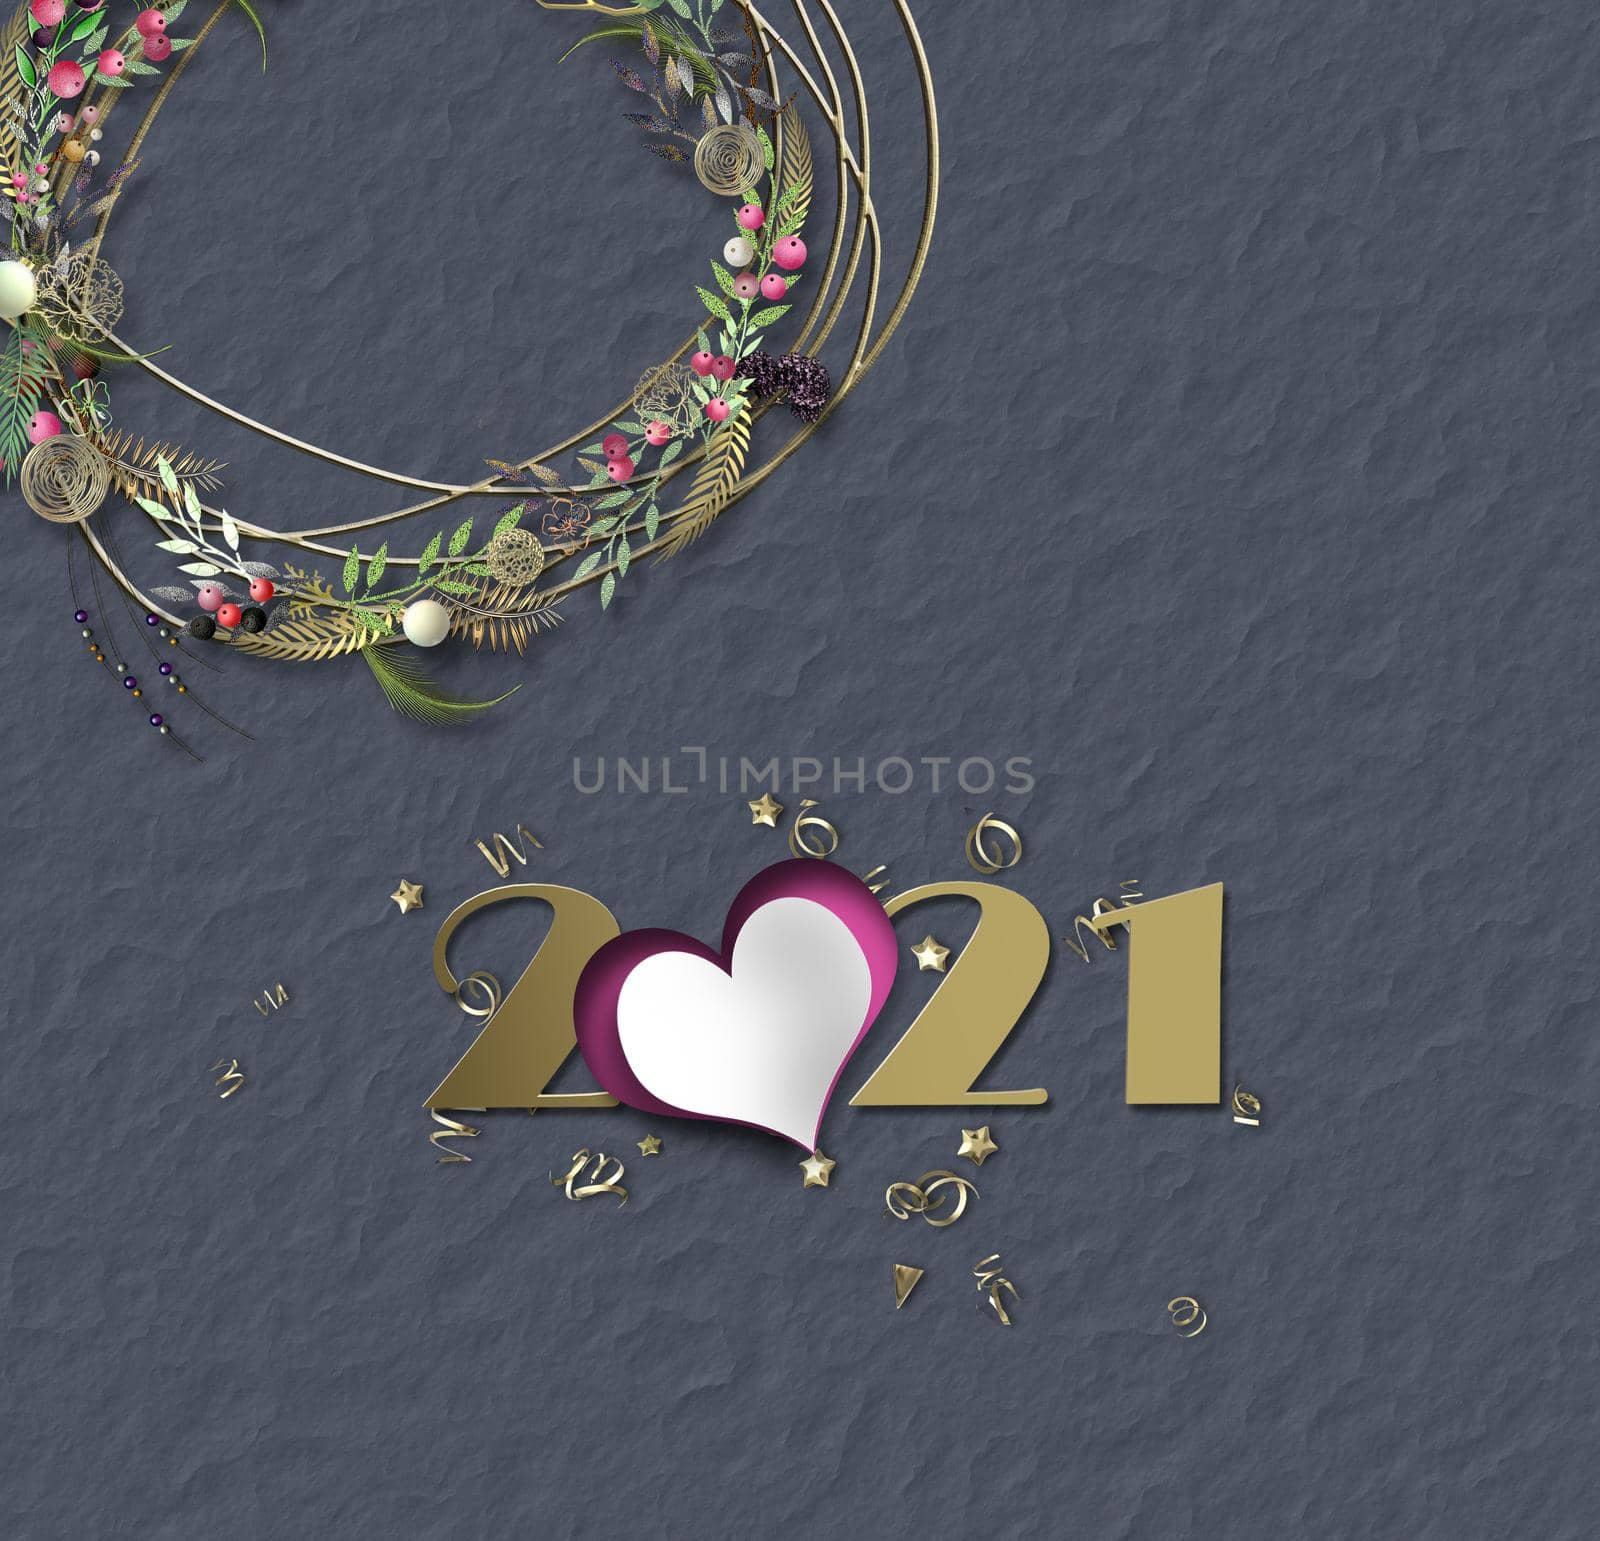 Valentines 2021 card, heart, floral wreath, 2021 on grey paper background. Beautiful love design. 3D illustration